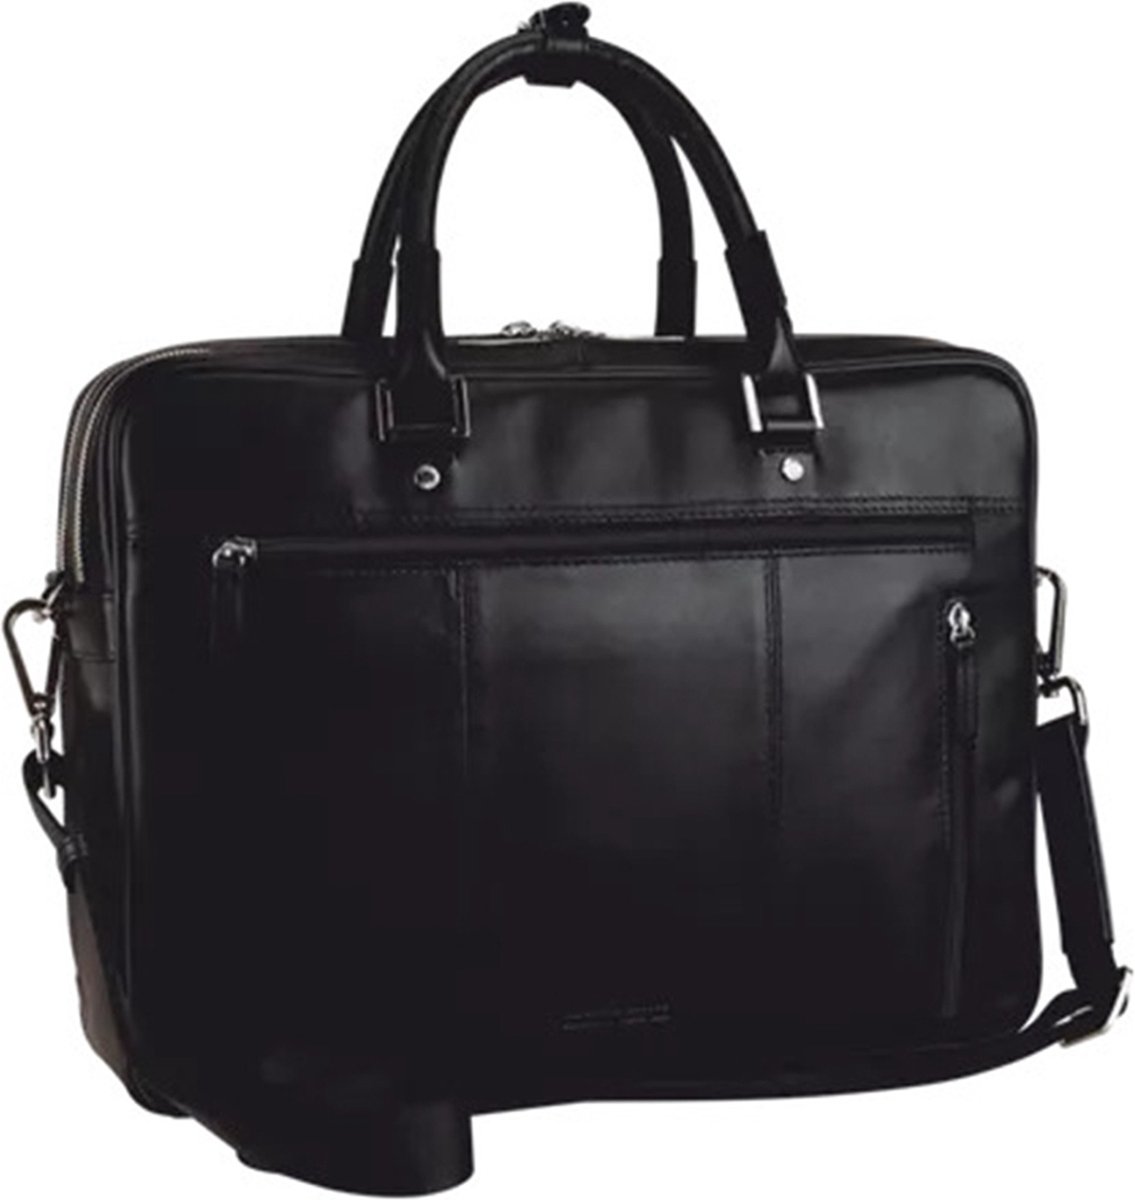 Leonhard Heyden Montreal Zipped Briefcase 2 Compartments black